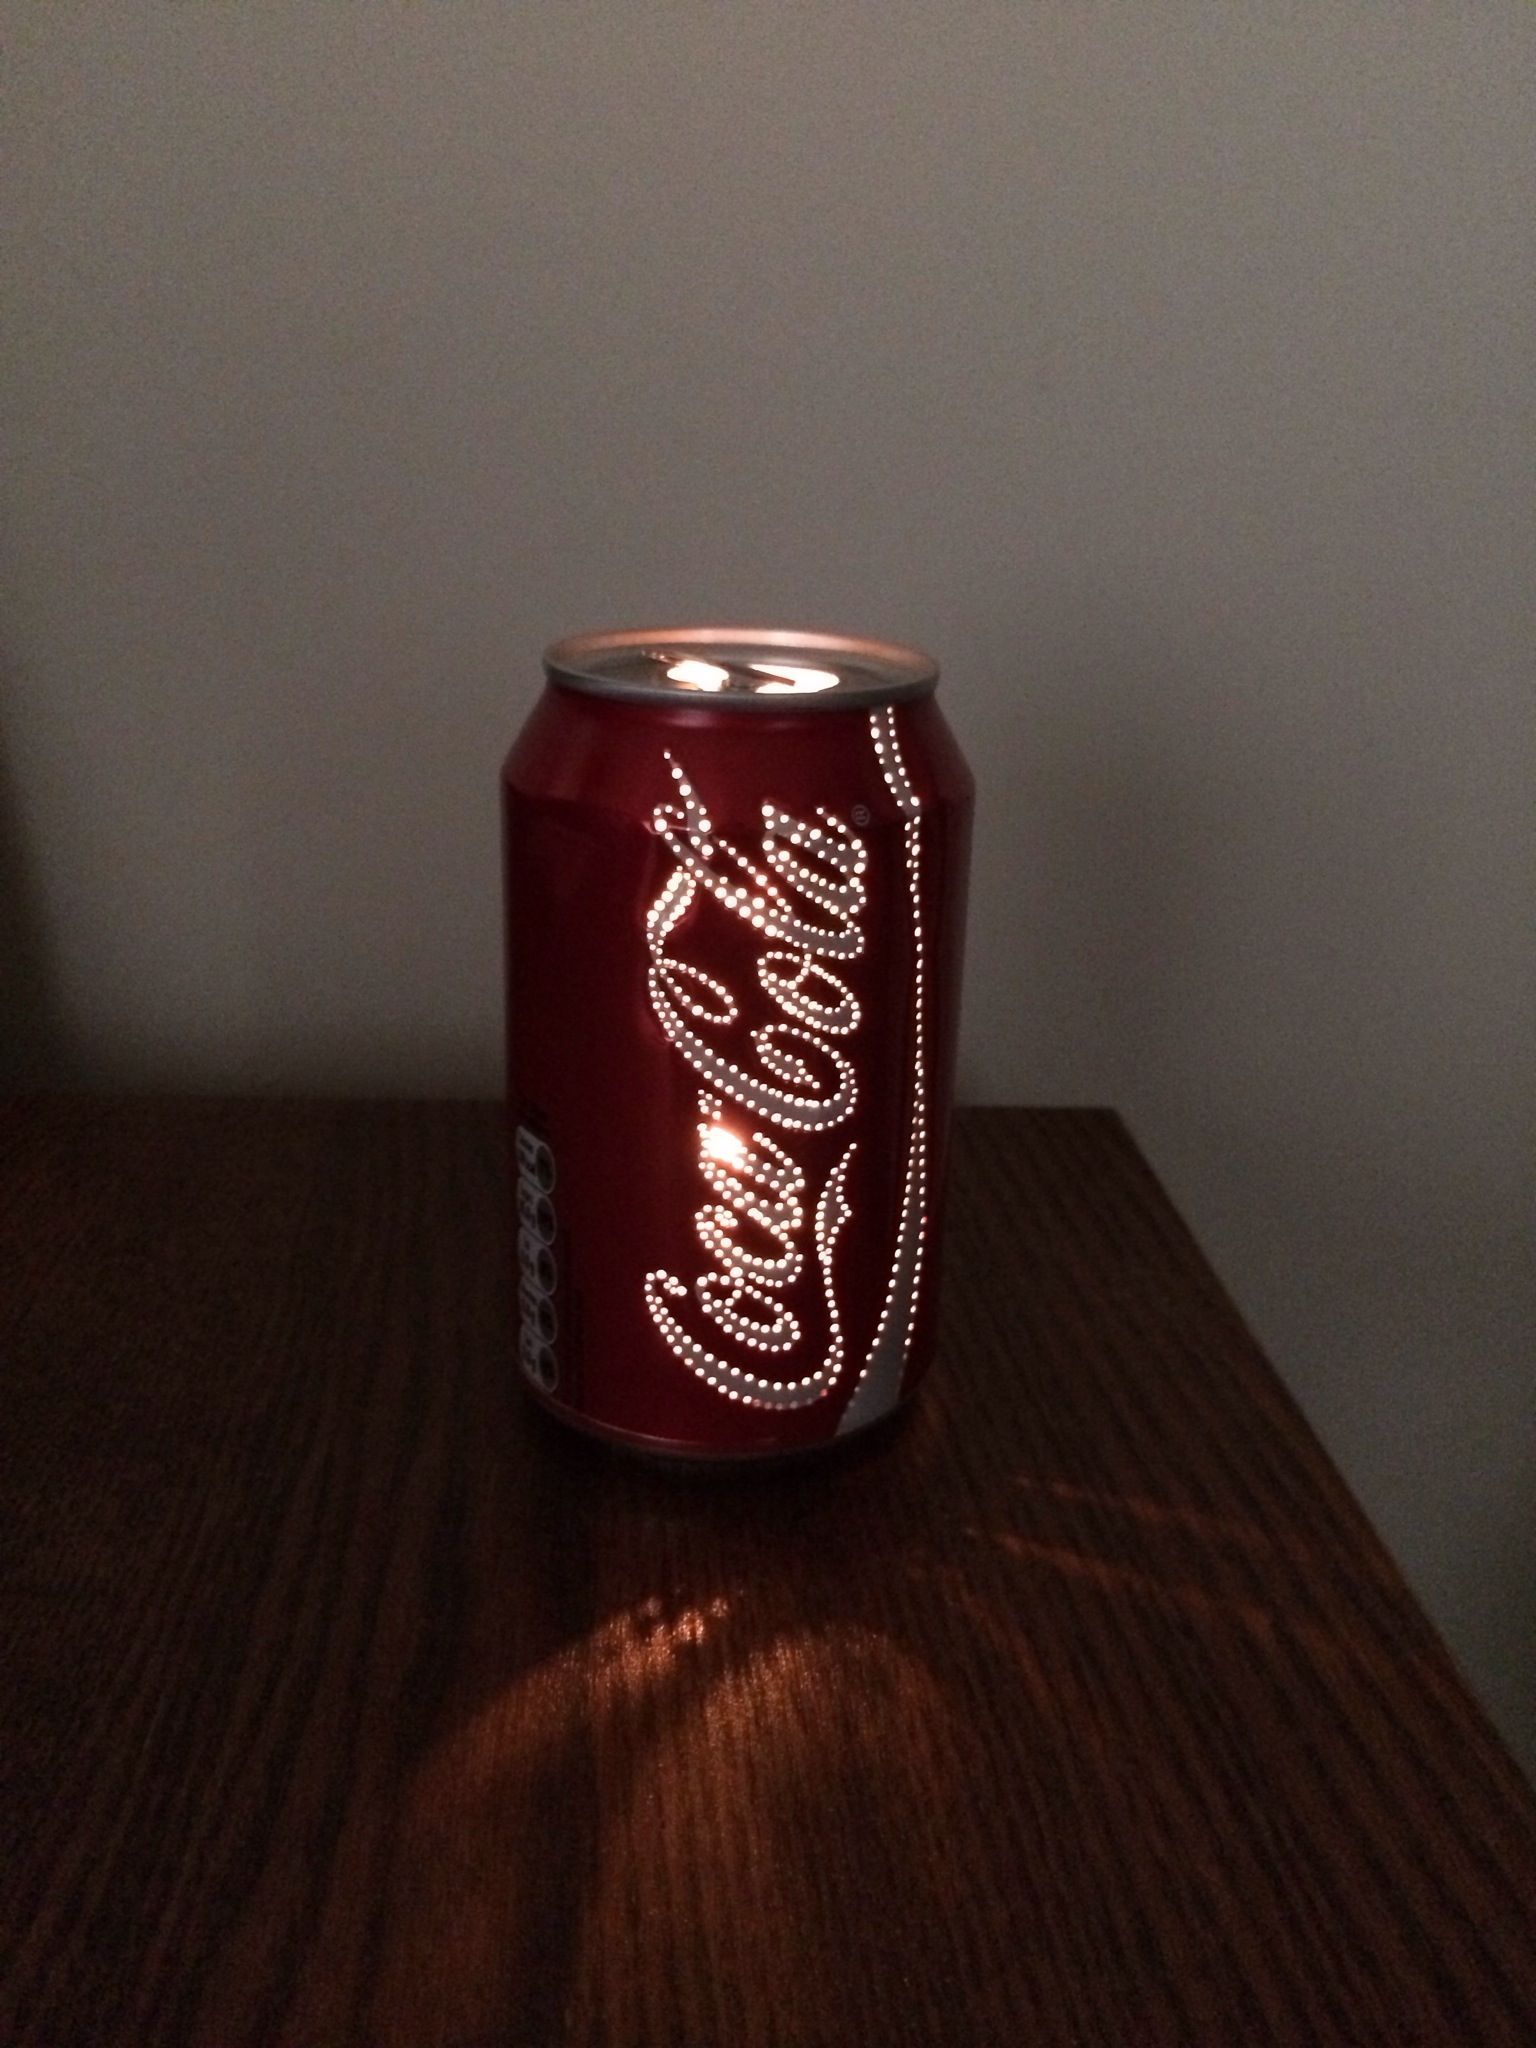 Cool! Poke holes in a empty soda can and put a light inside! Only HOW would you get the light in…